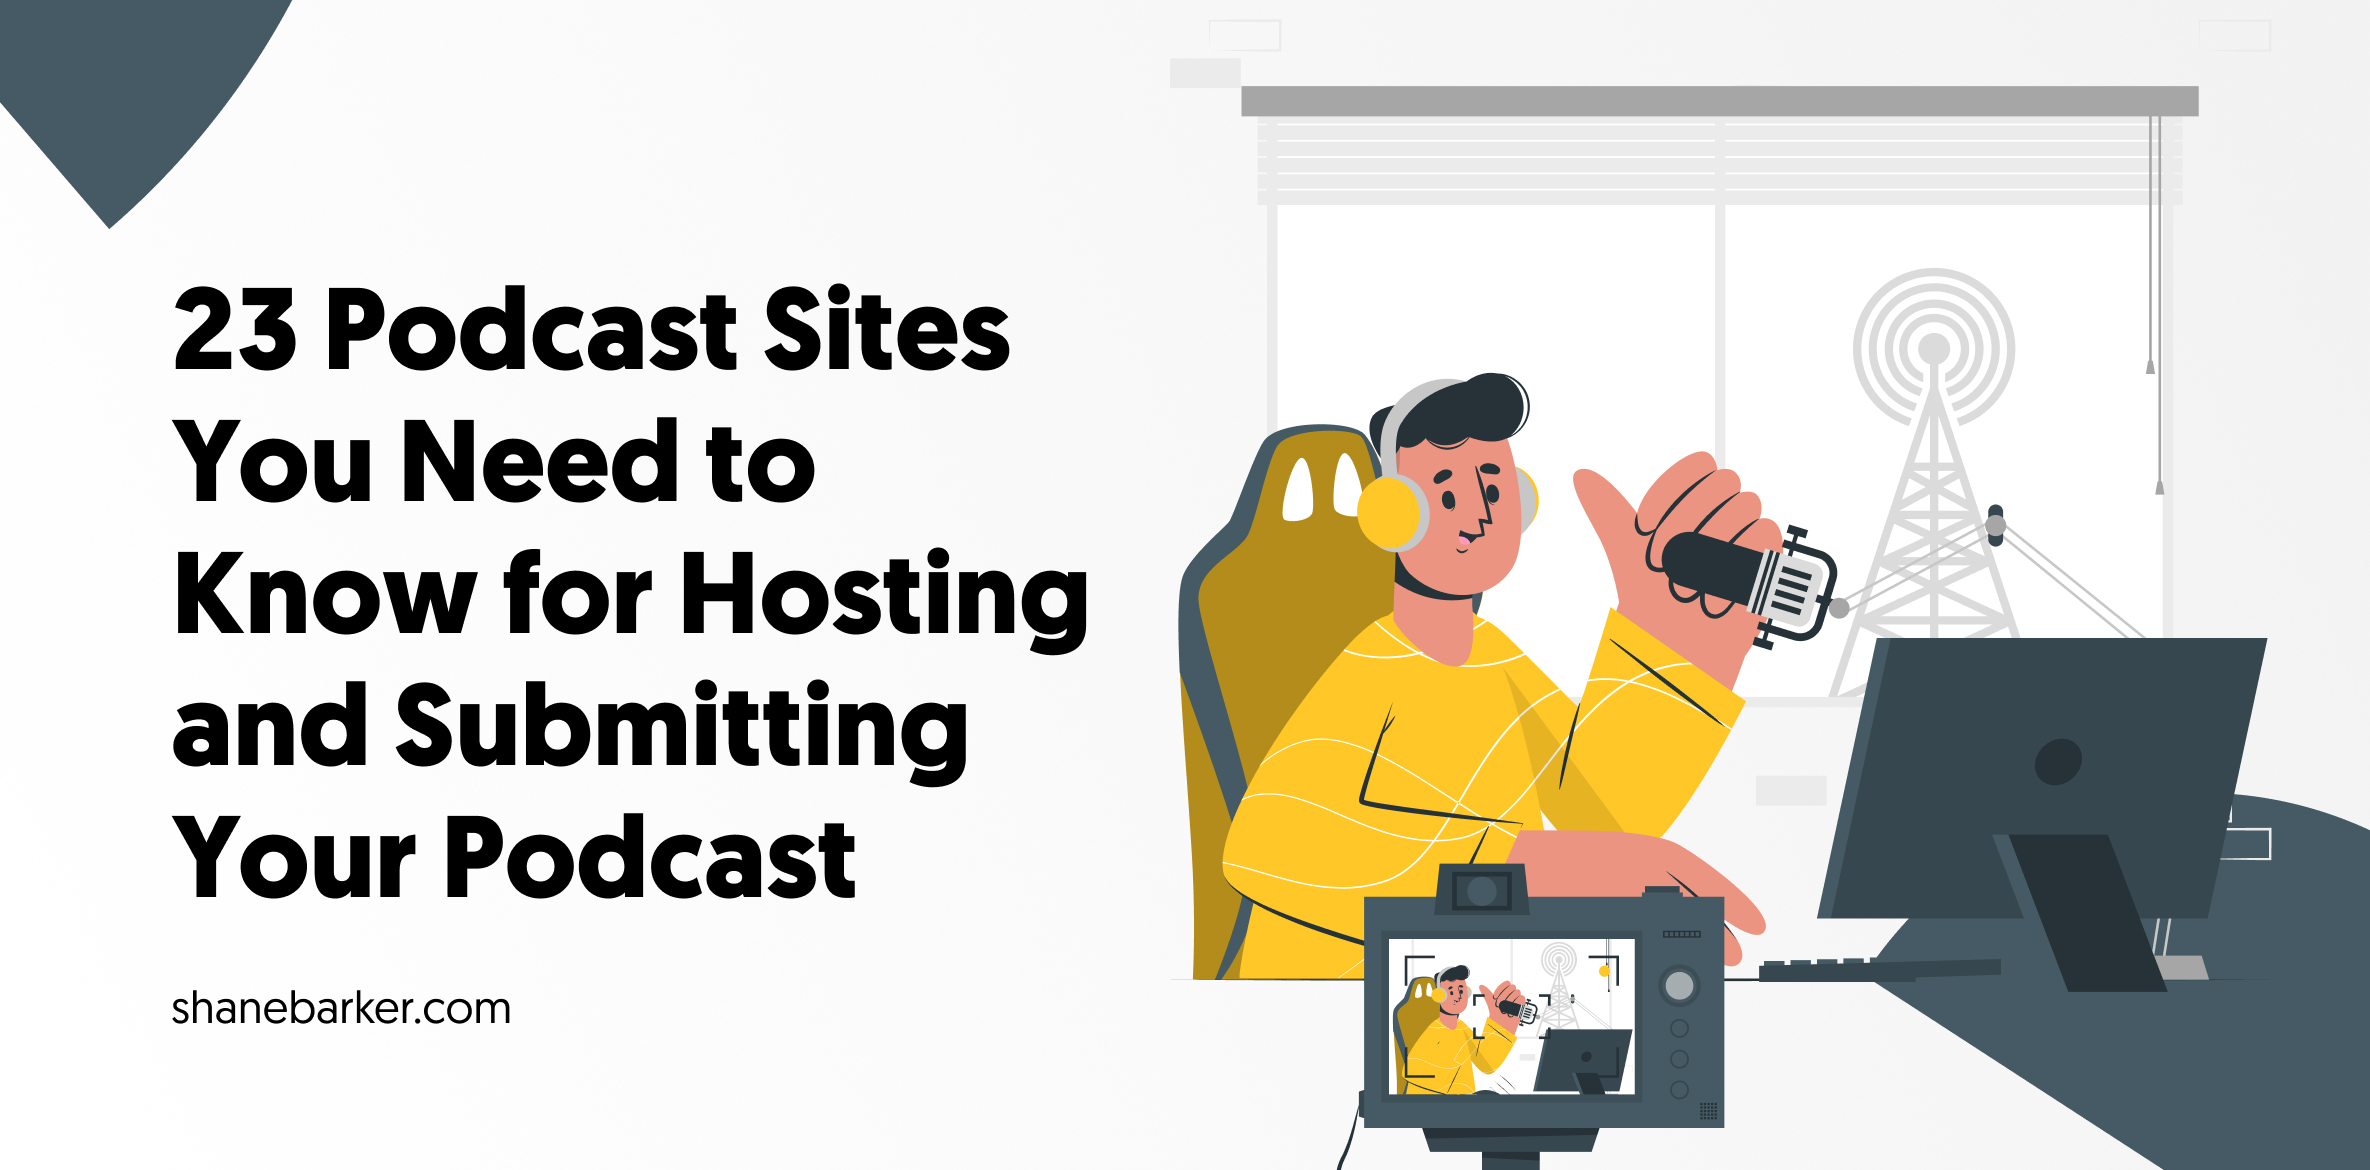 23 Podcast Sites You Need to Know for Hosting and Submitting Your Podcast